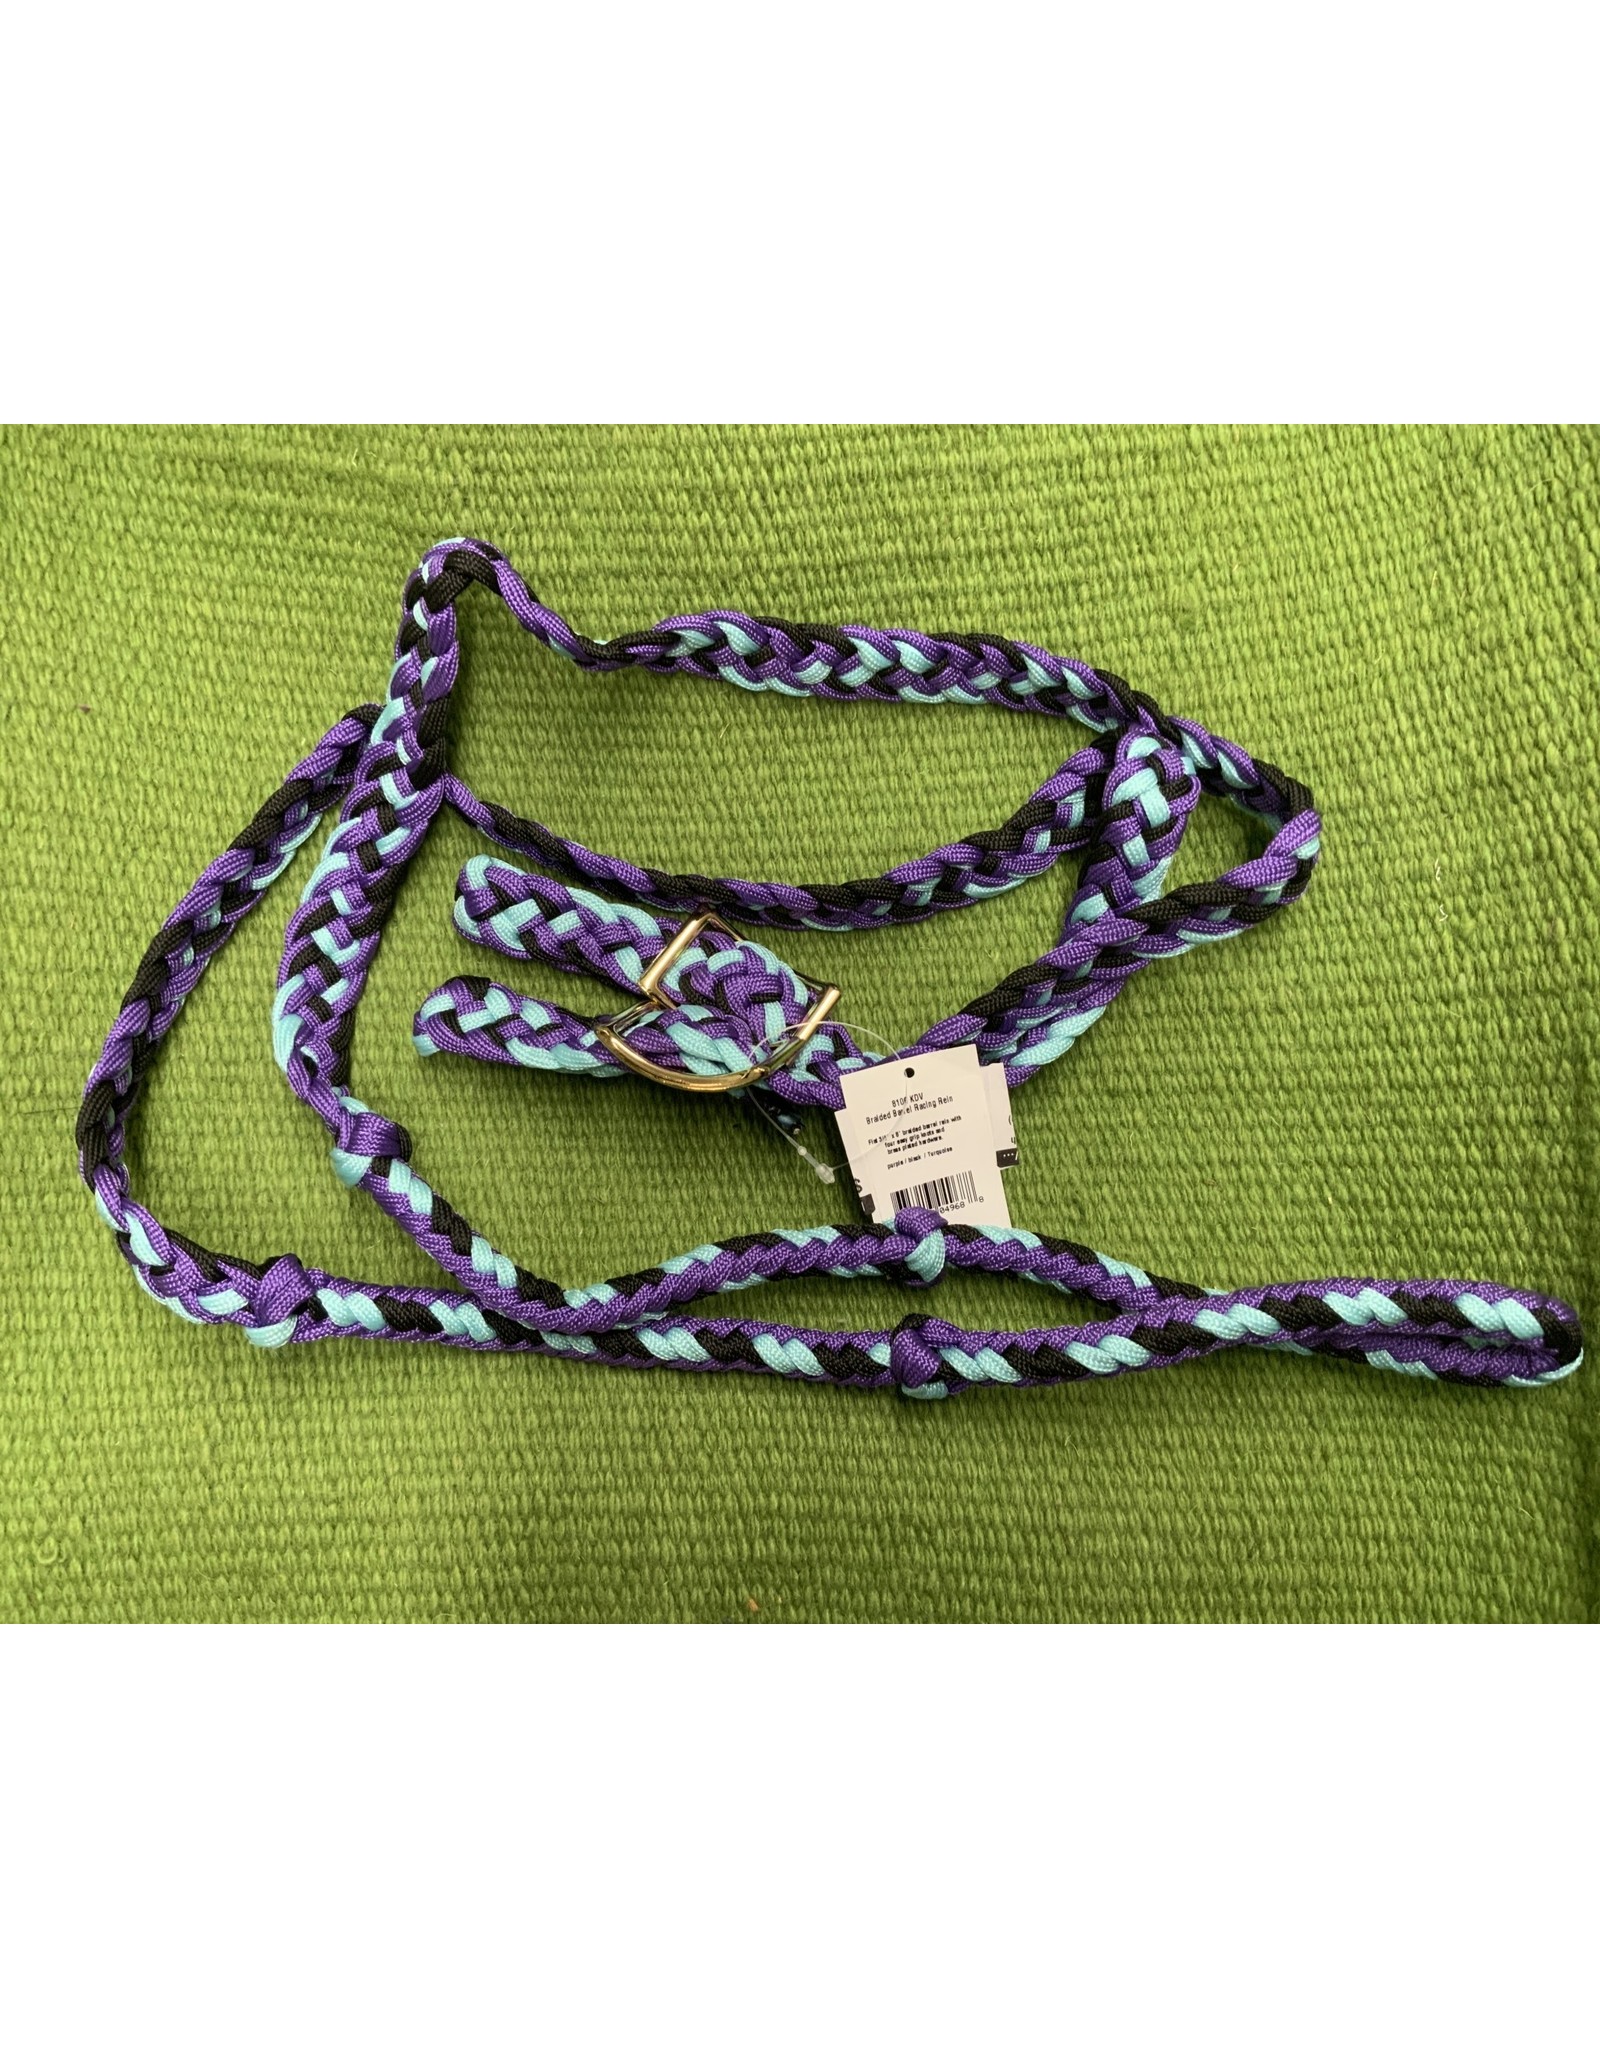 Braided Barrel Rein with Knots (Purple/Blace/Turquoise) 212102 22